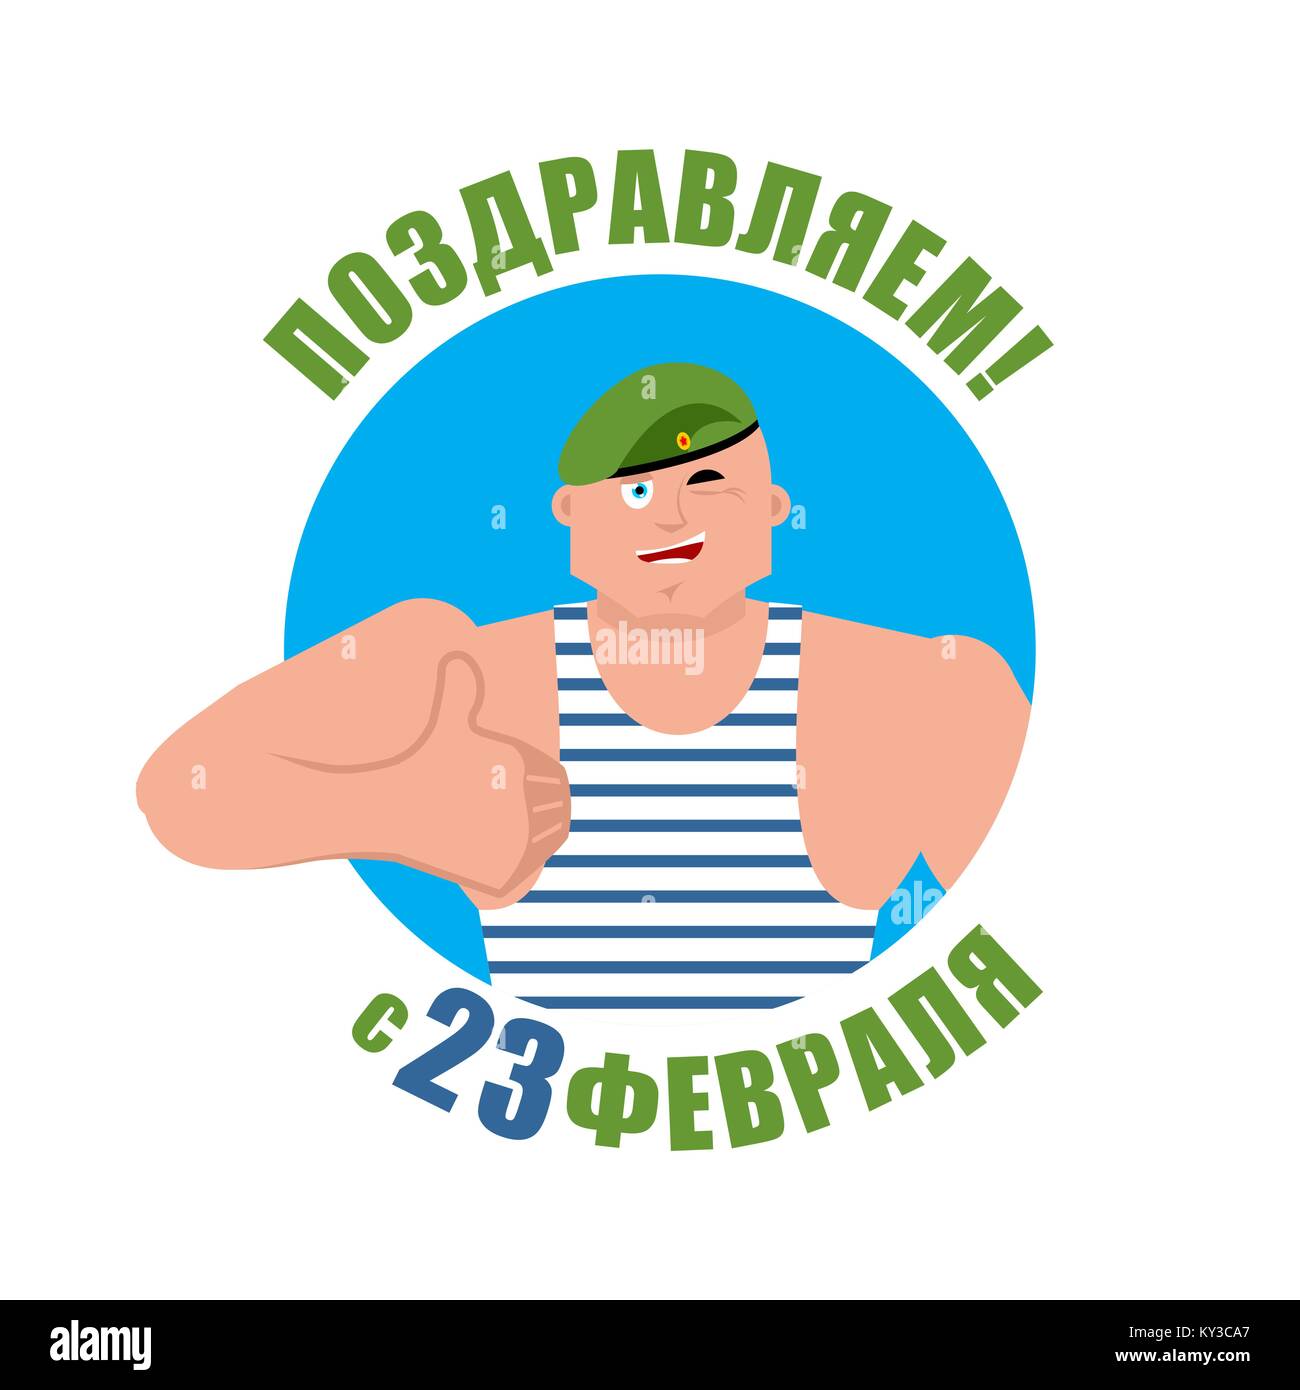 23 February. Defender of Fatherland Day. Russian soldier thumbs up and winks. Airborne troops happy emoji. Paratrooper Military in Russia Joyful. Tran Stock Vector